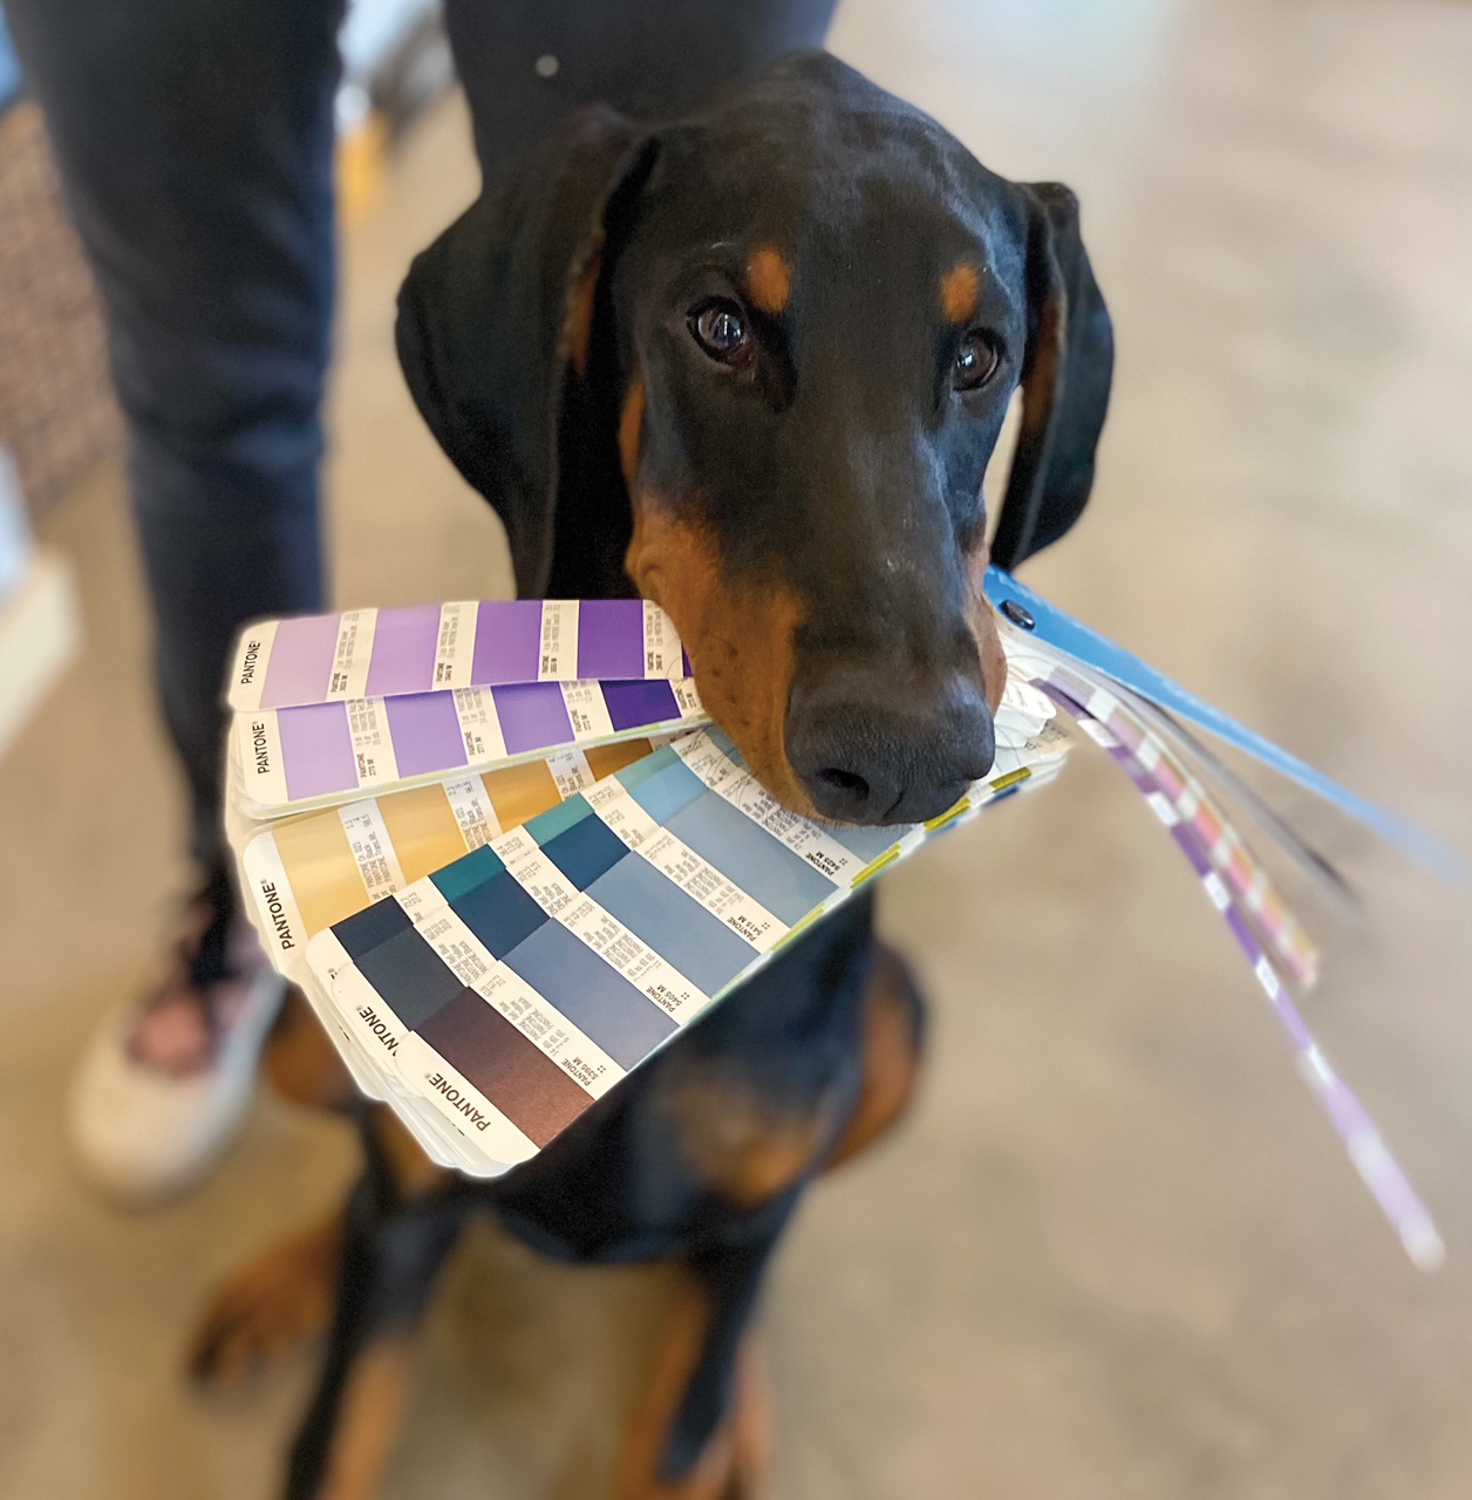 Dog holding color swatches in its mouth.